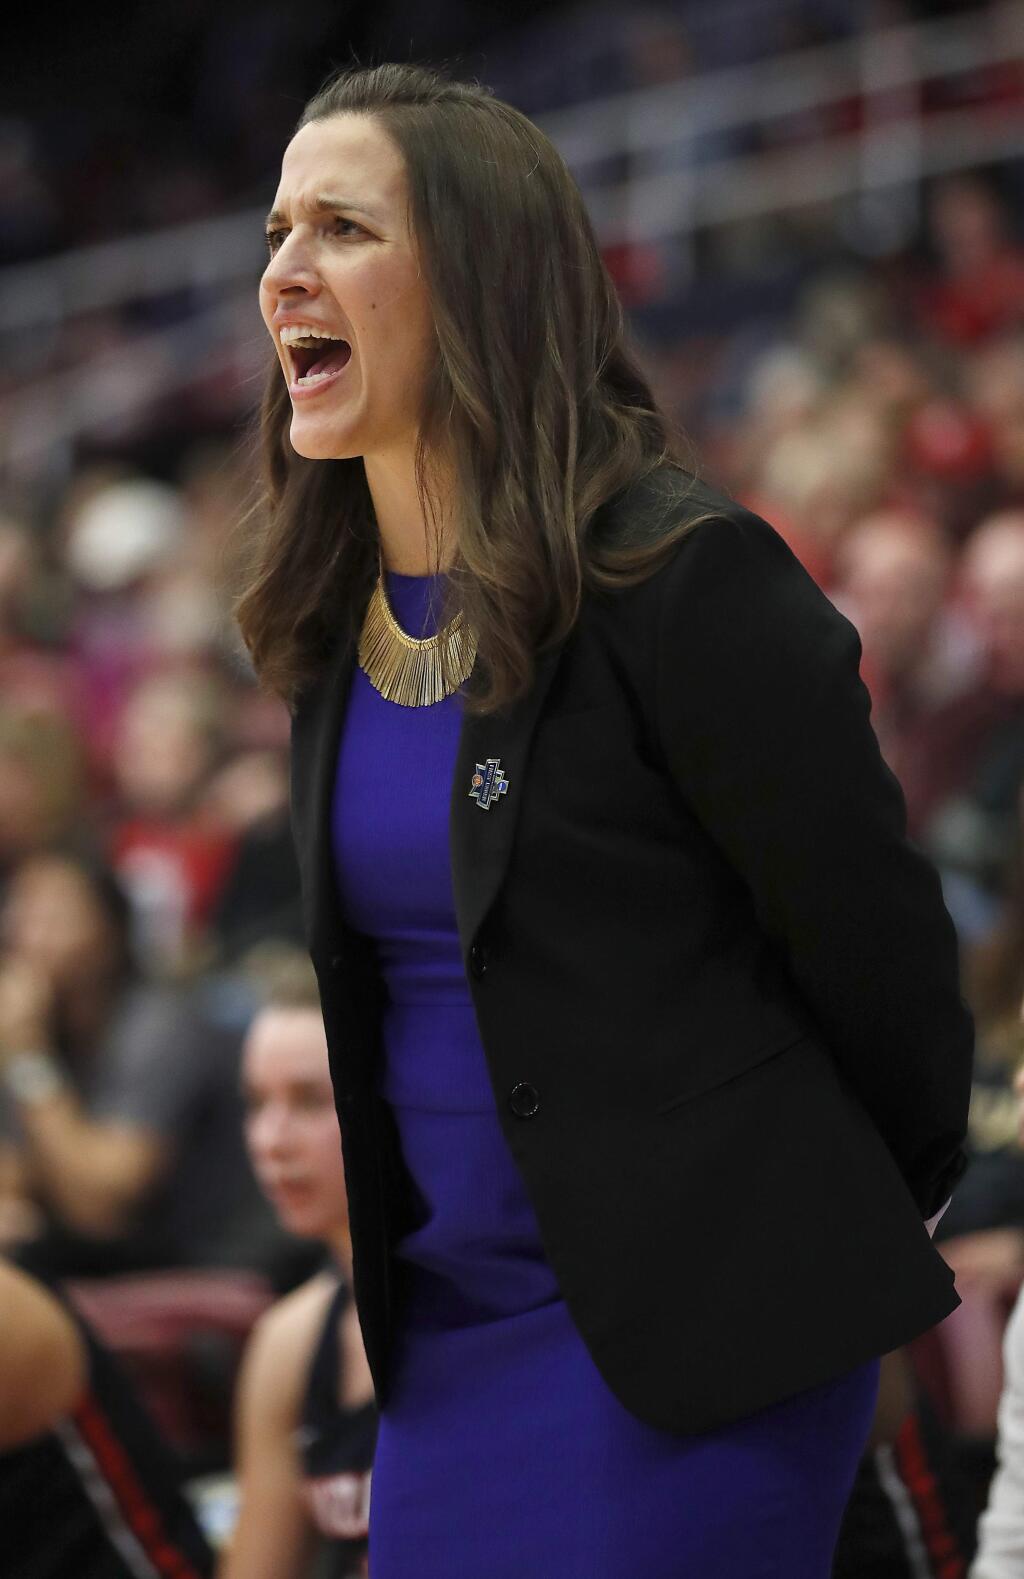 Gonzaga head coach Lisa Fortier yells out a play to her team during the first half against Stanford in a first-round game in the NCAA women's college basketball tournament in Stanford, Calif., Saturday, March 17, 2018. (AP Photo/Tony Avelar)